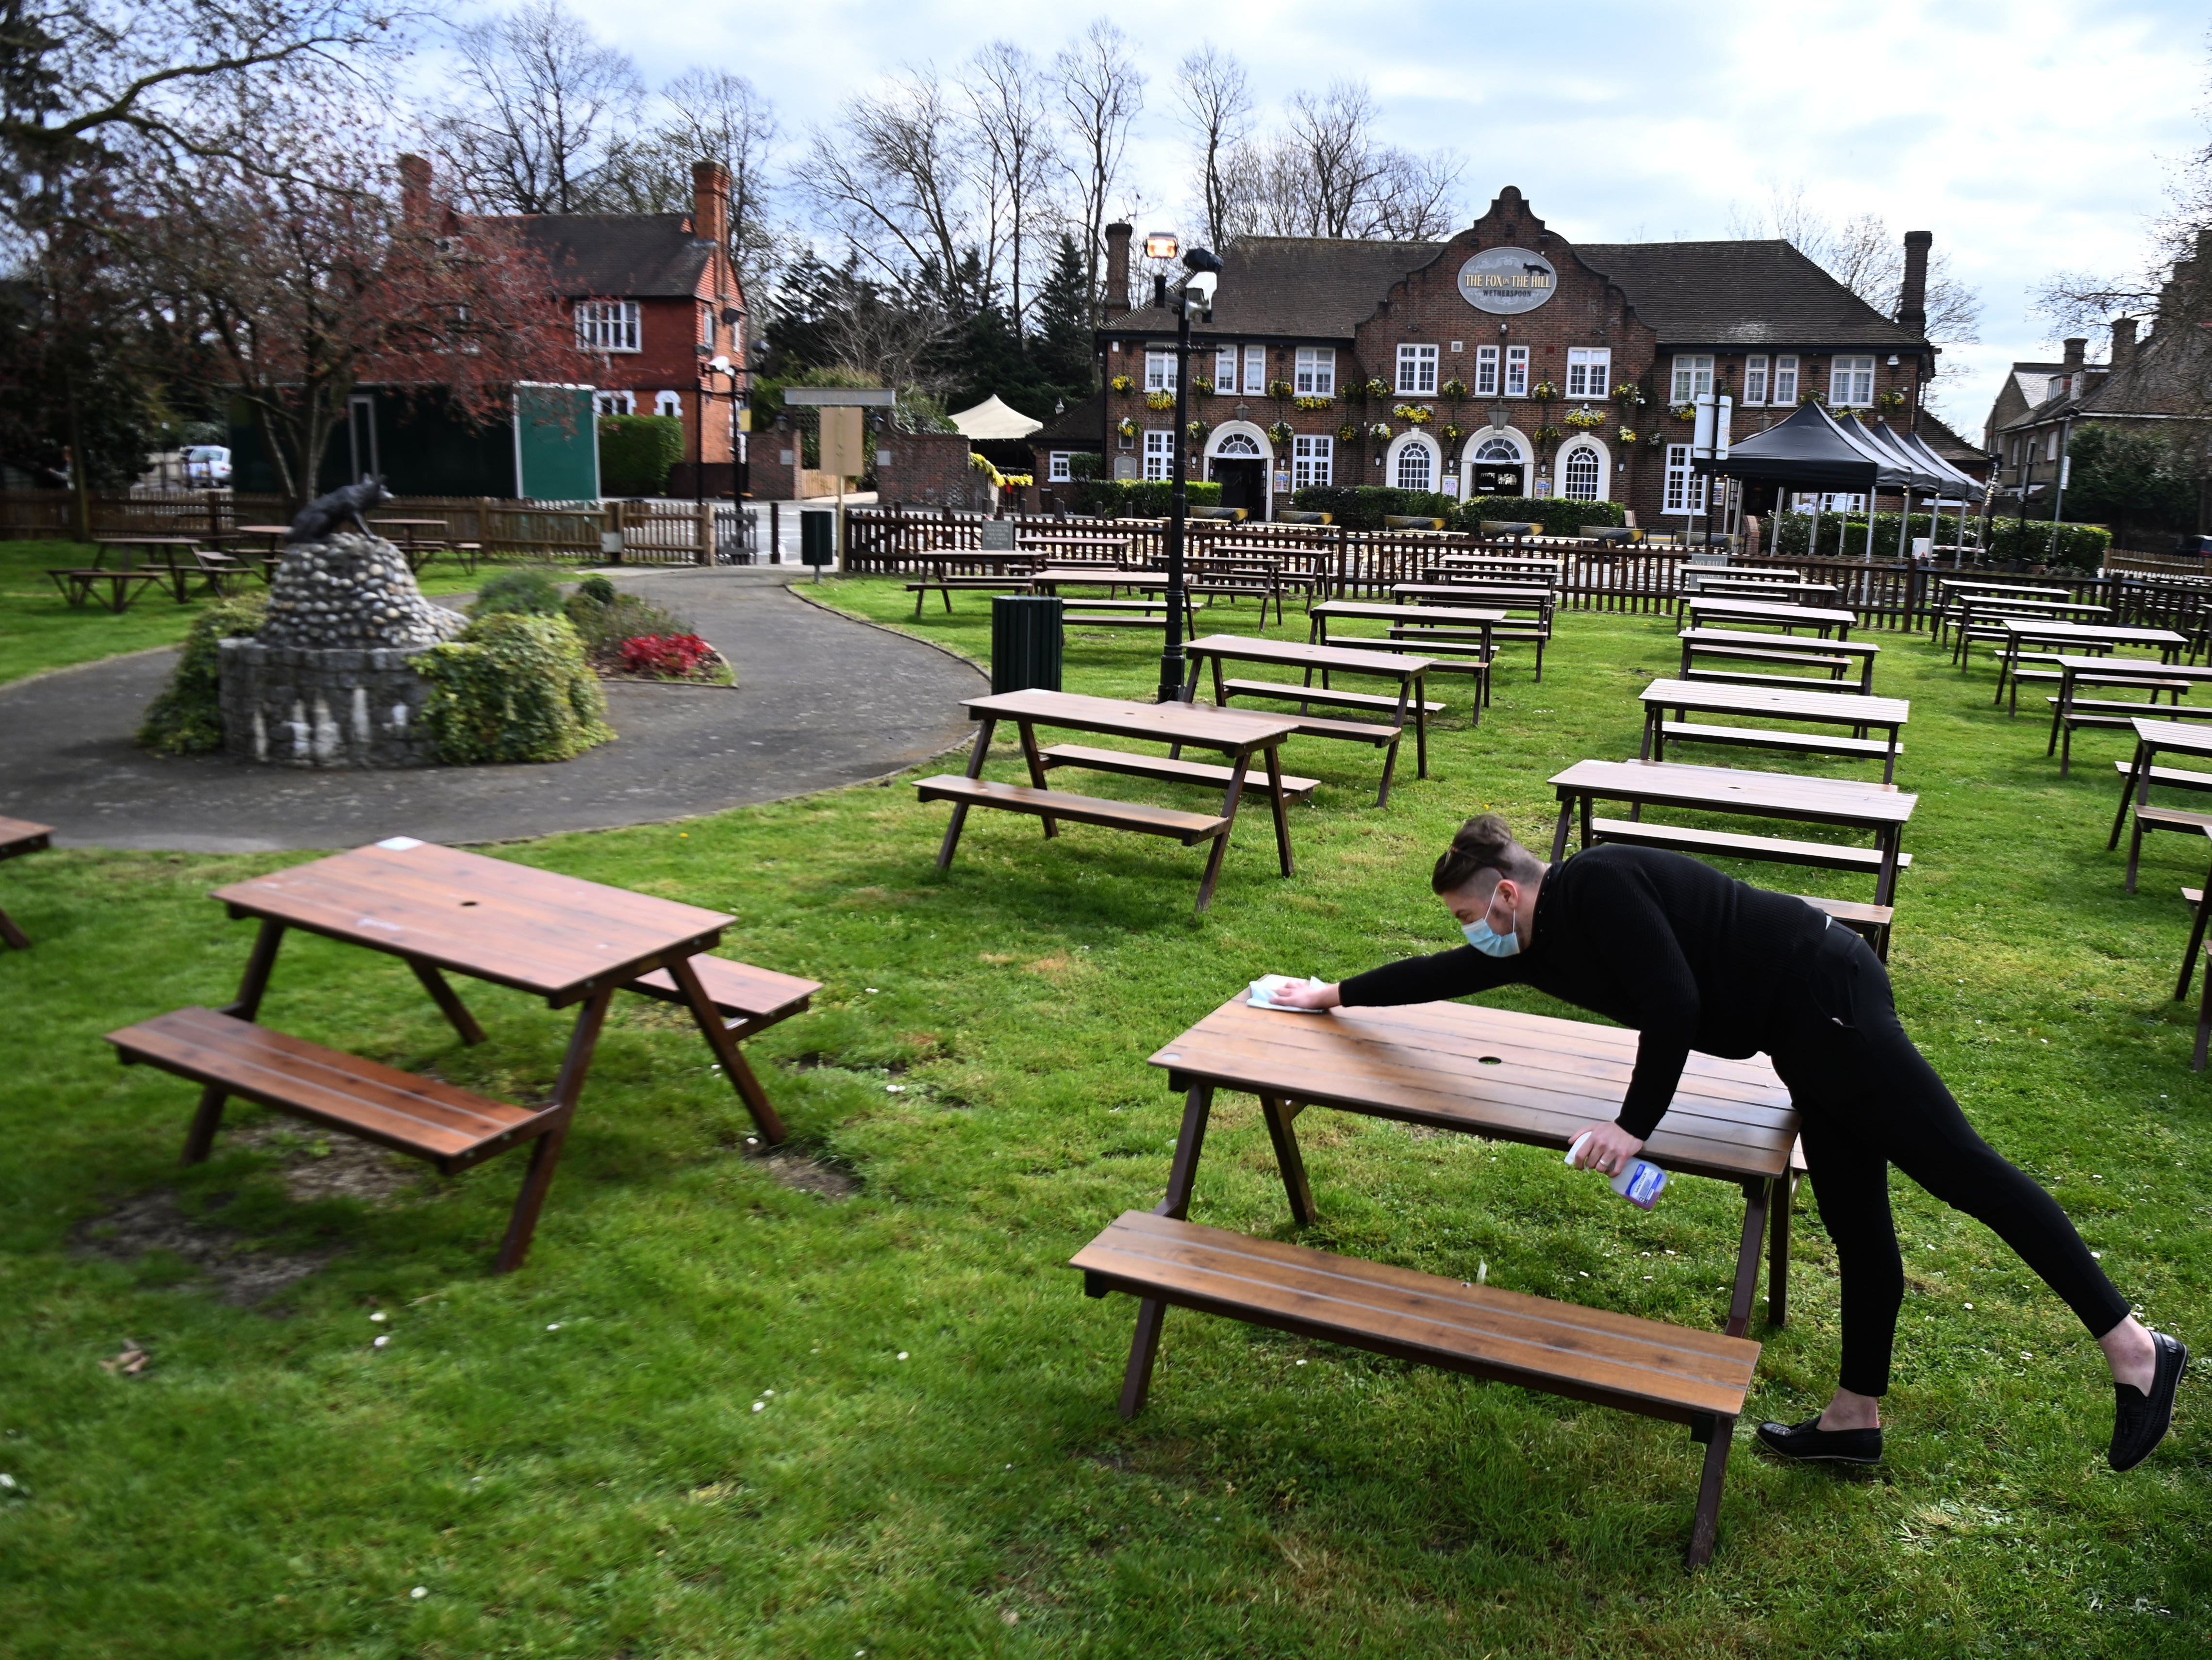 Rainy weather spells bad news for punters hoping to get their first pint in a beer garden this year